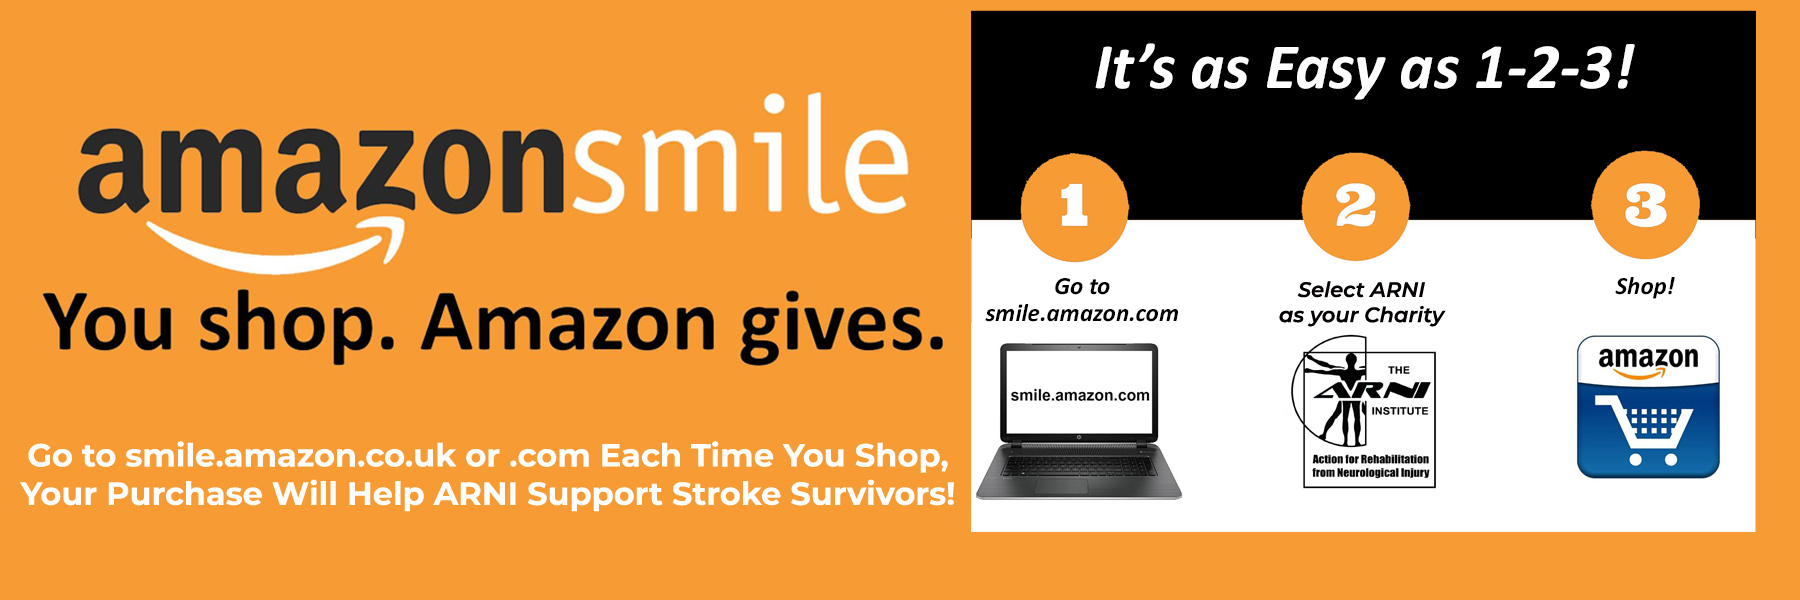 AmazonSmileHomepage2Slideshow copy - DONATE TO STROKE SURVIVORS AT NO EXTRA COST EACH TIME YOU USE AMAZON! - Stroke Exercise Training - online courses for therapists